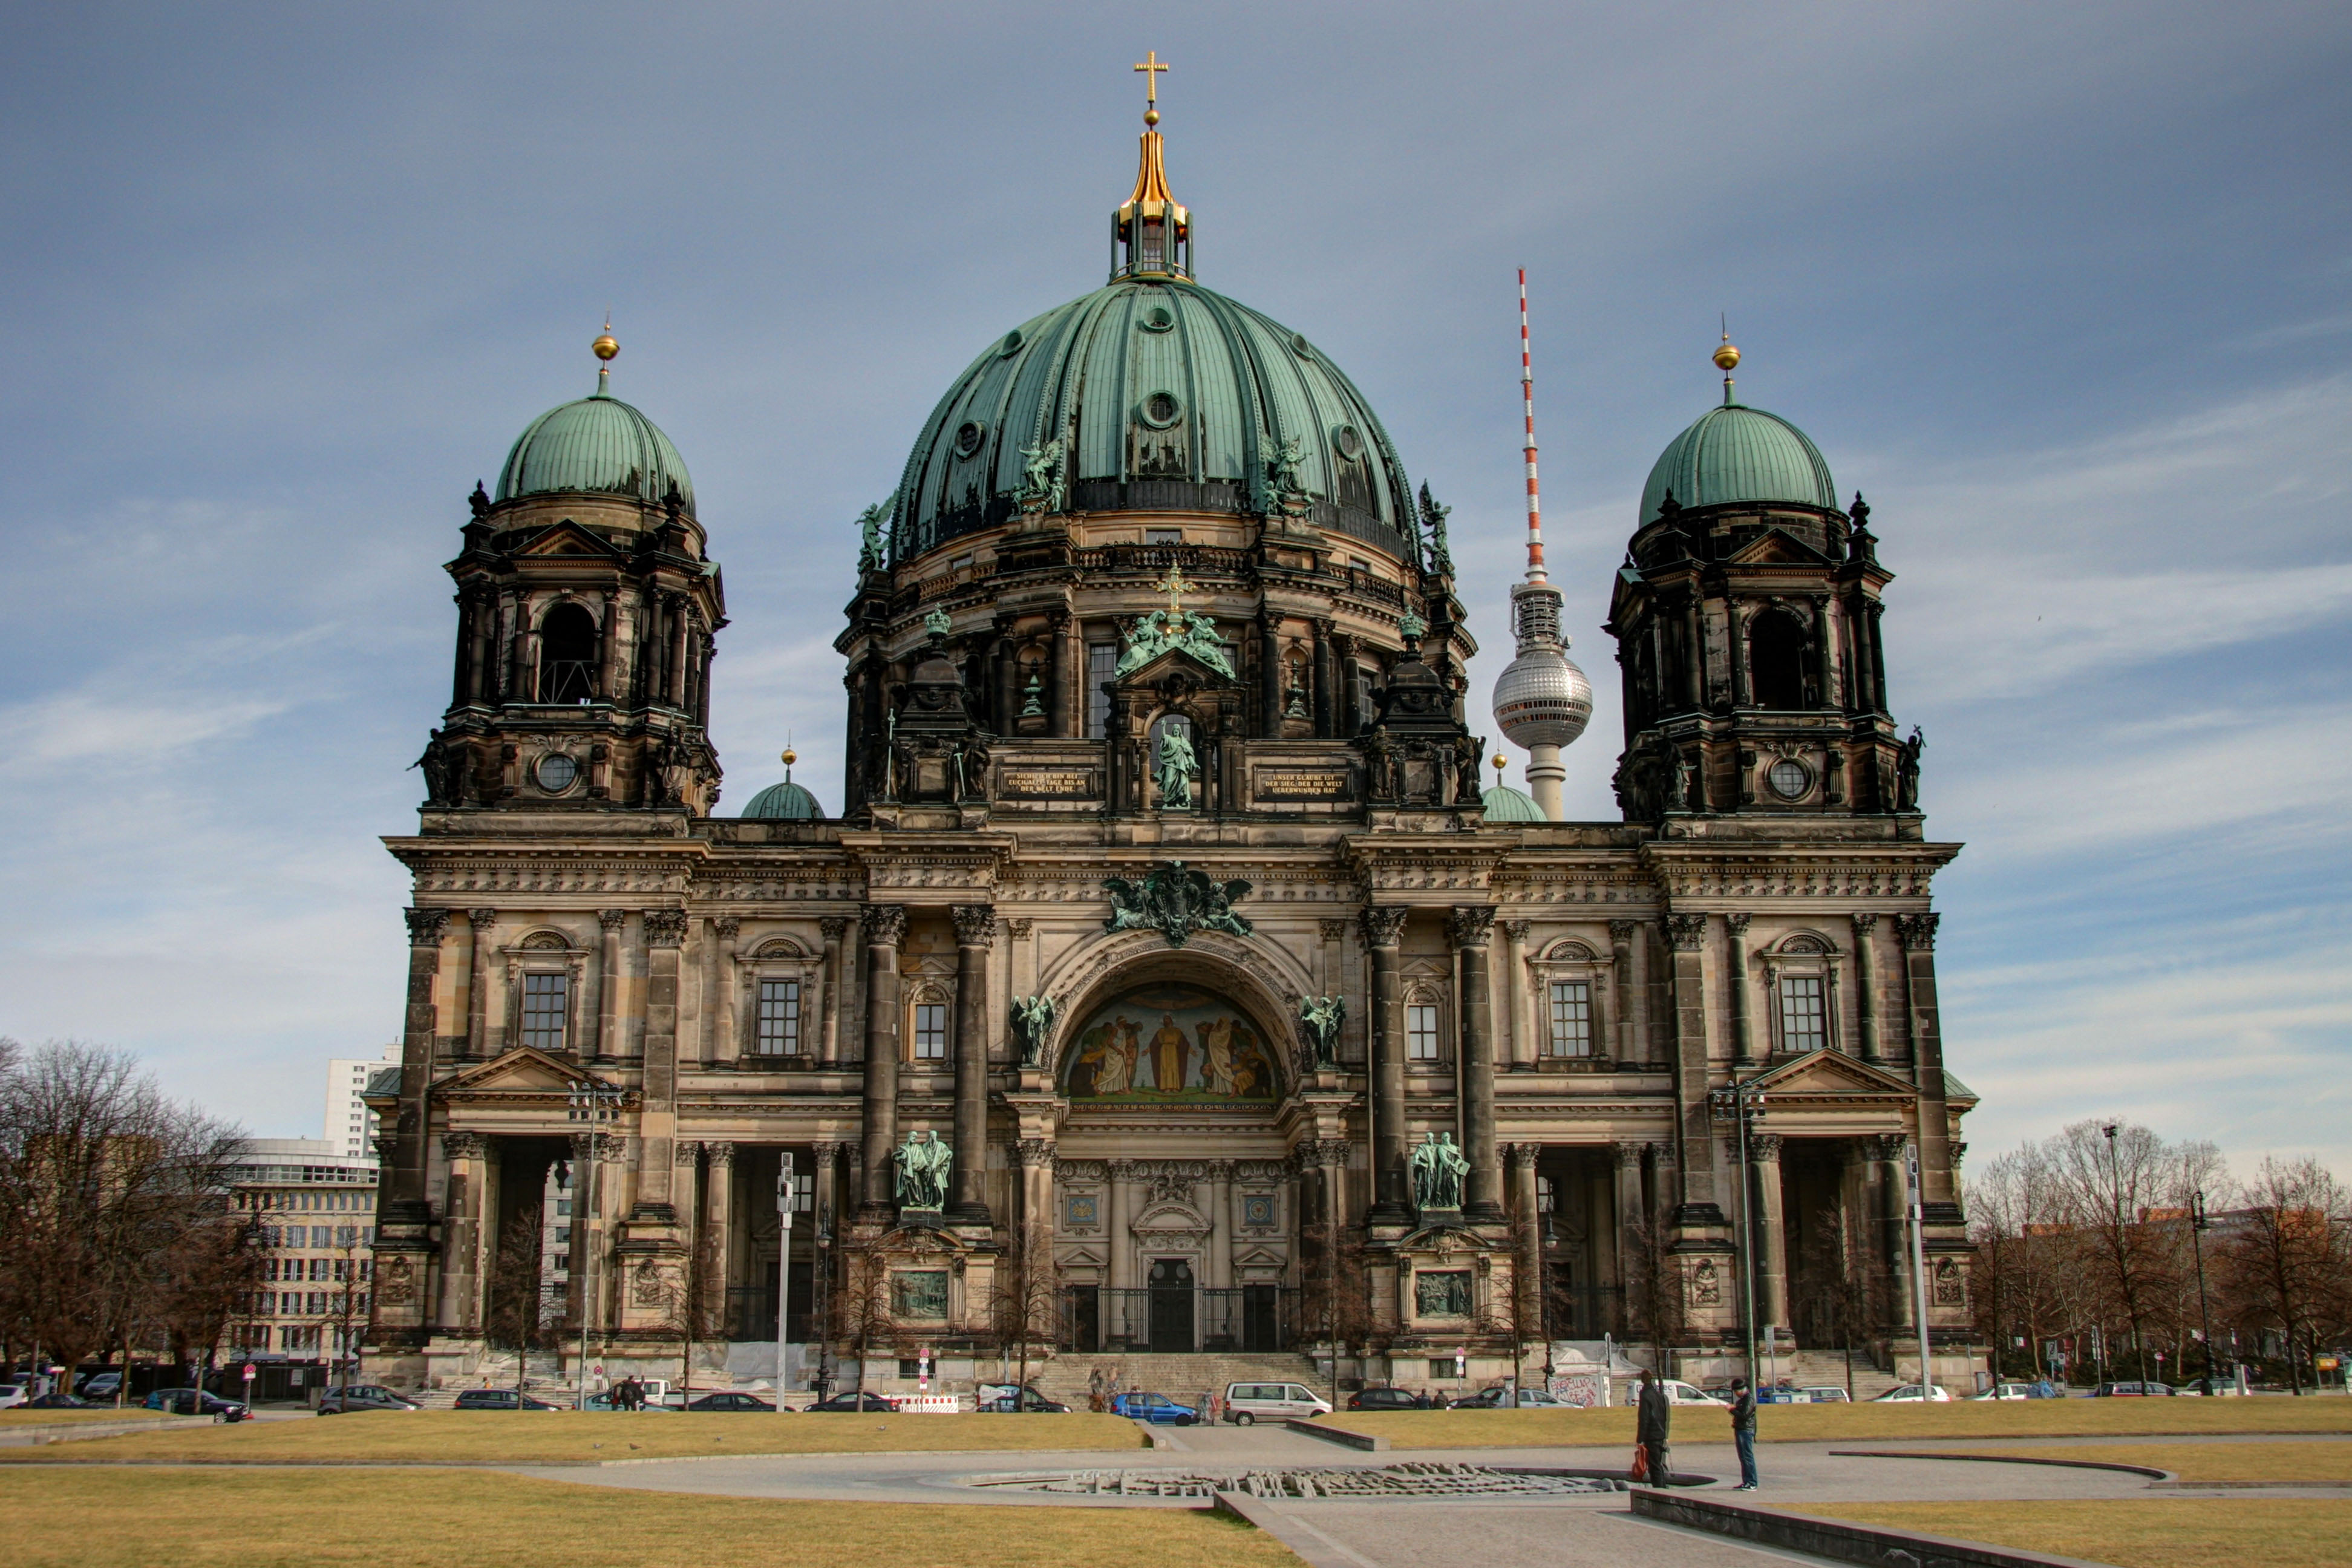 the amazing front view of the berlin cathedral